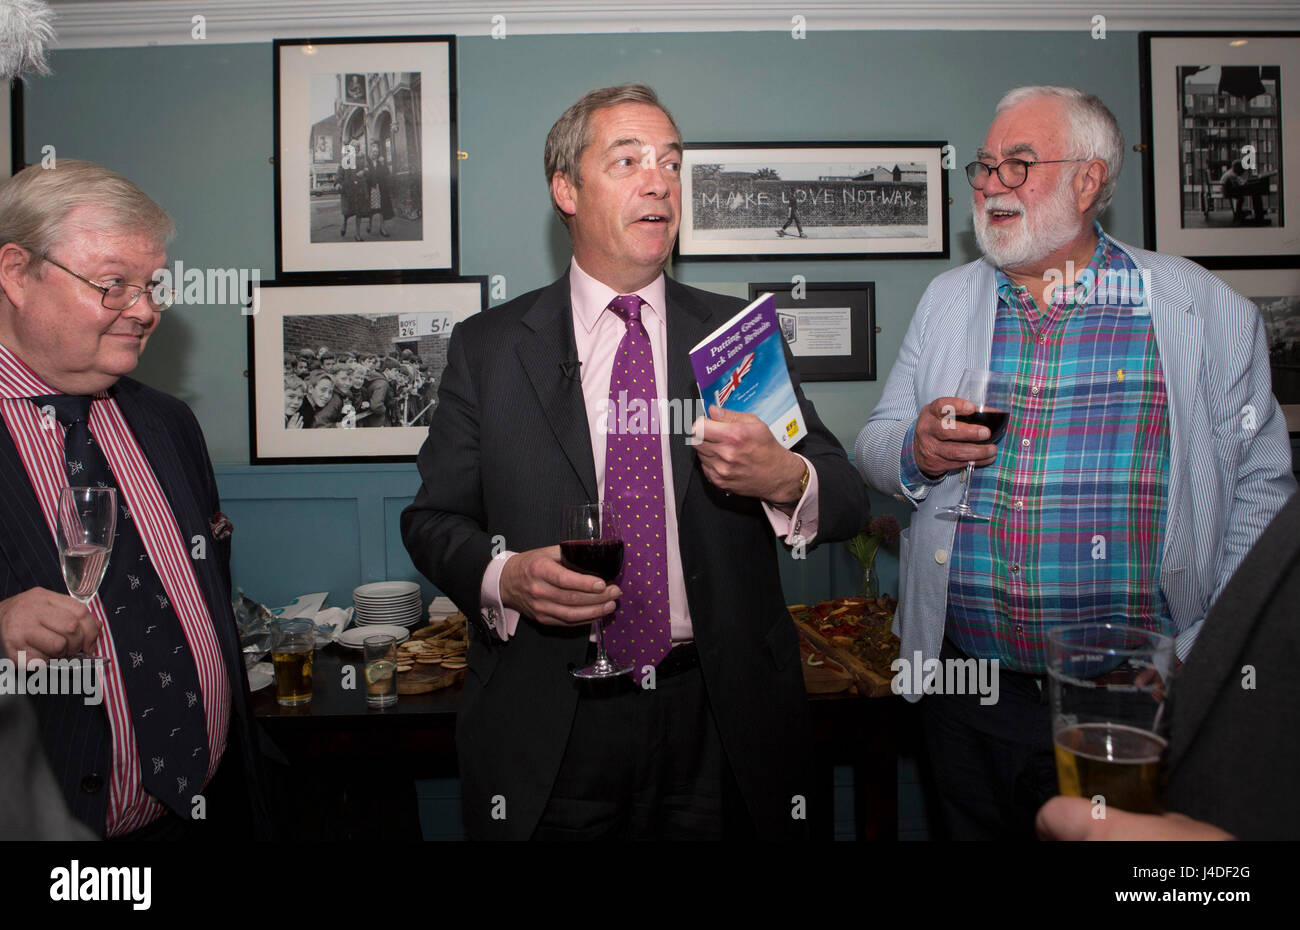 Former Ukip leader Nigel Farage speaks with Ukip members and supporters at the launch of Bill Etheridge's new book, Putting great back into Britain. Stock Photo